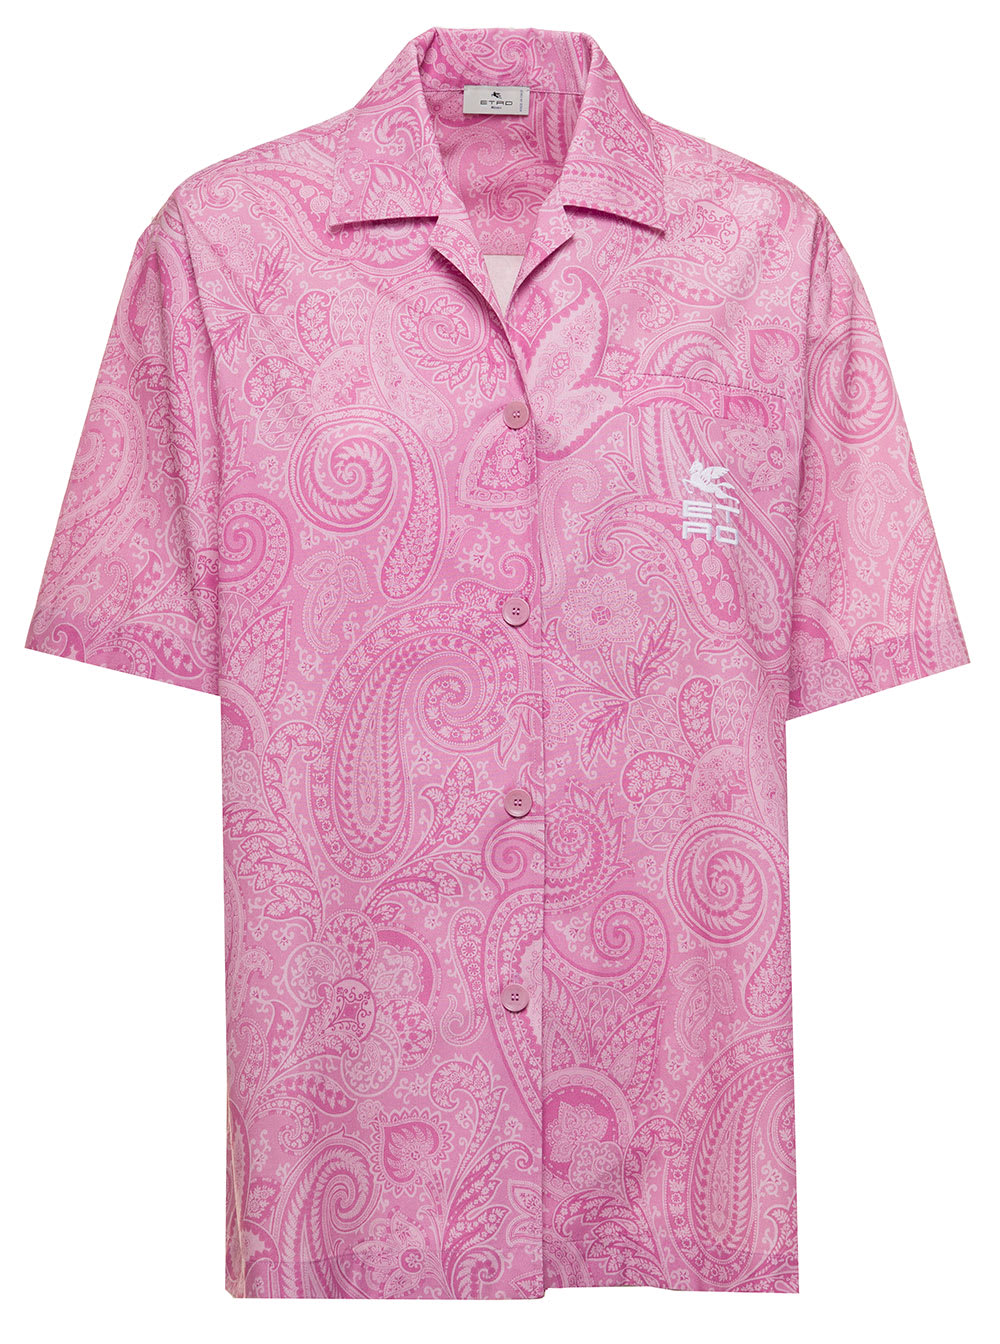 Etro Womans Cotton Pink Pailsey Printed Bowling Shirt